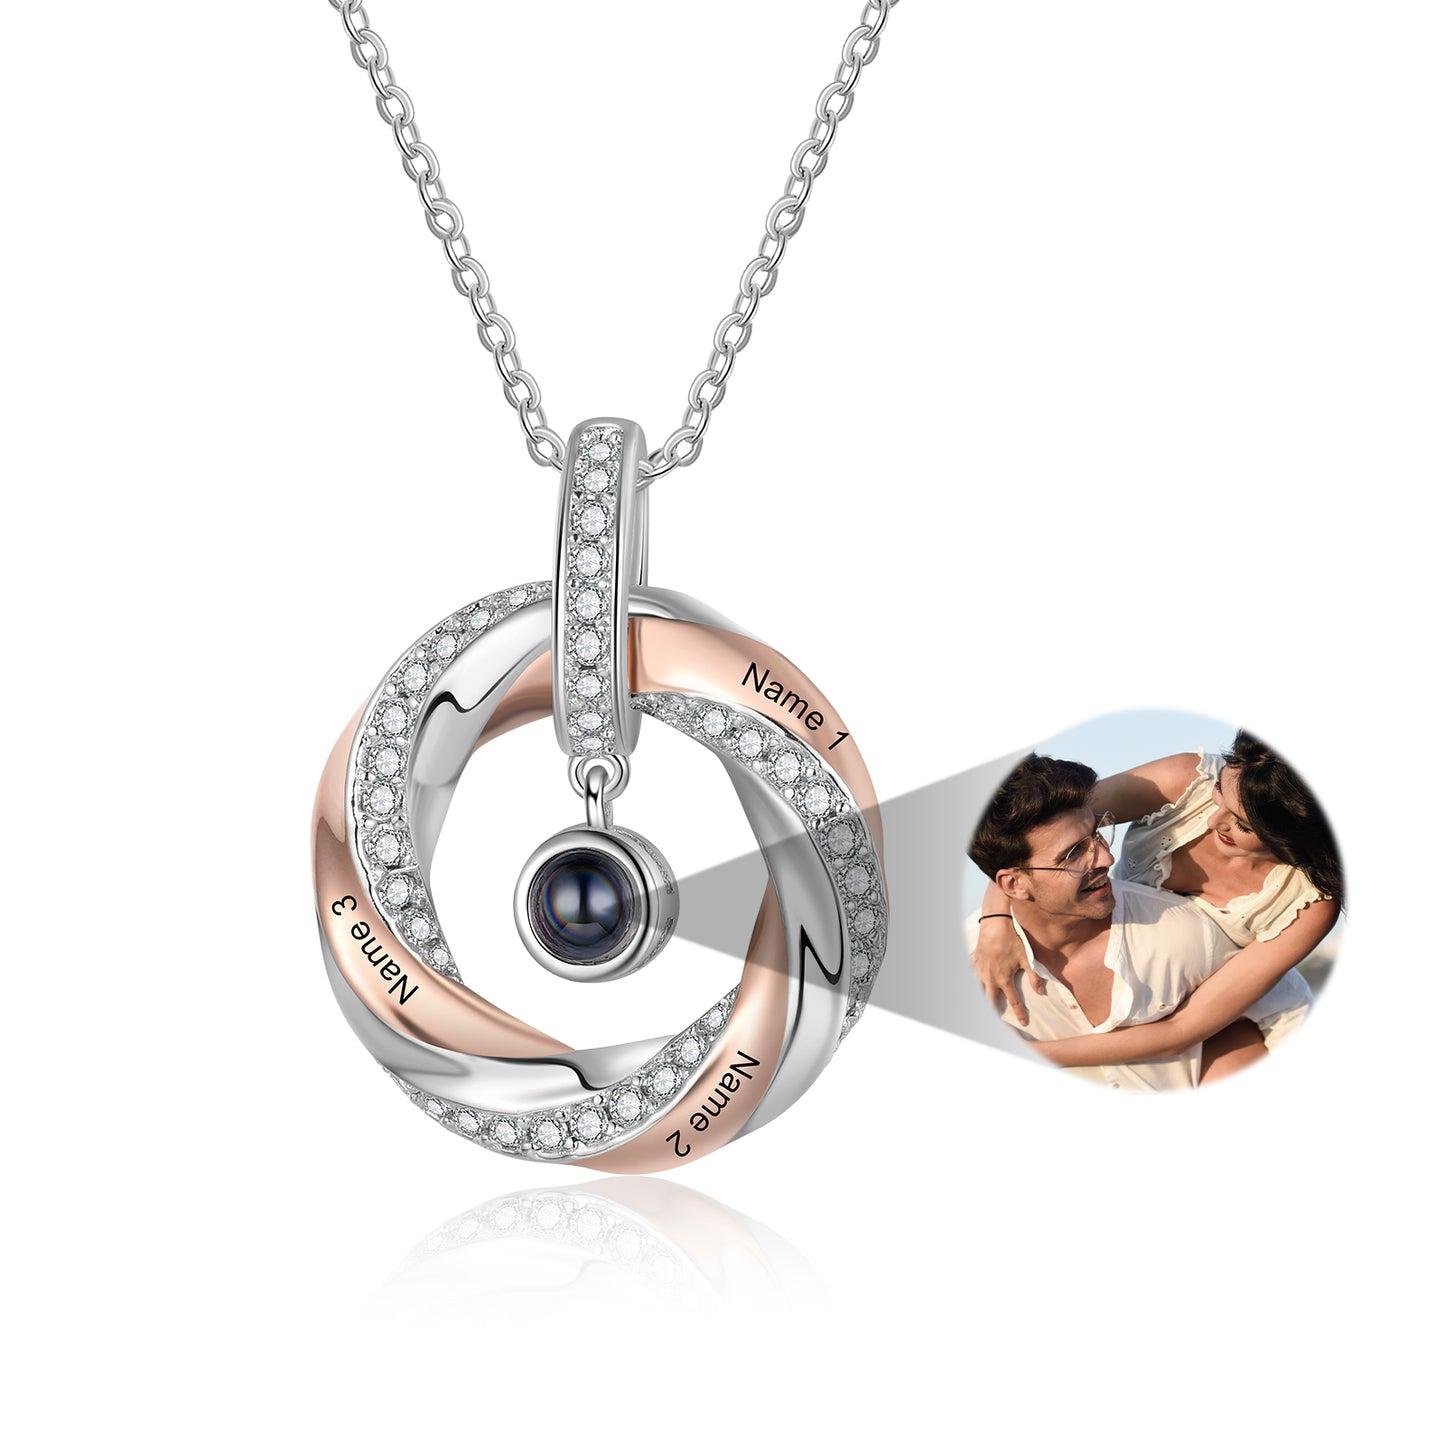 Personalized Projection Necklace